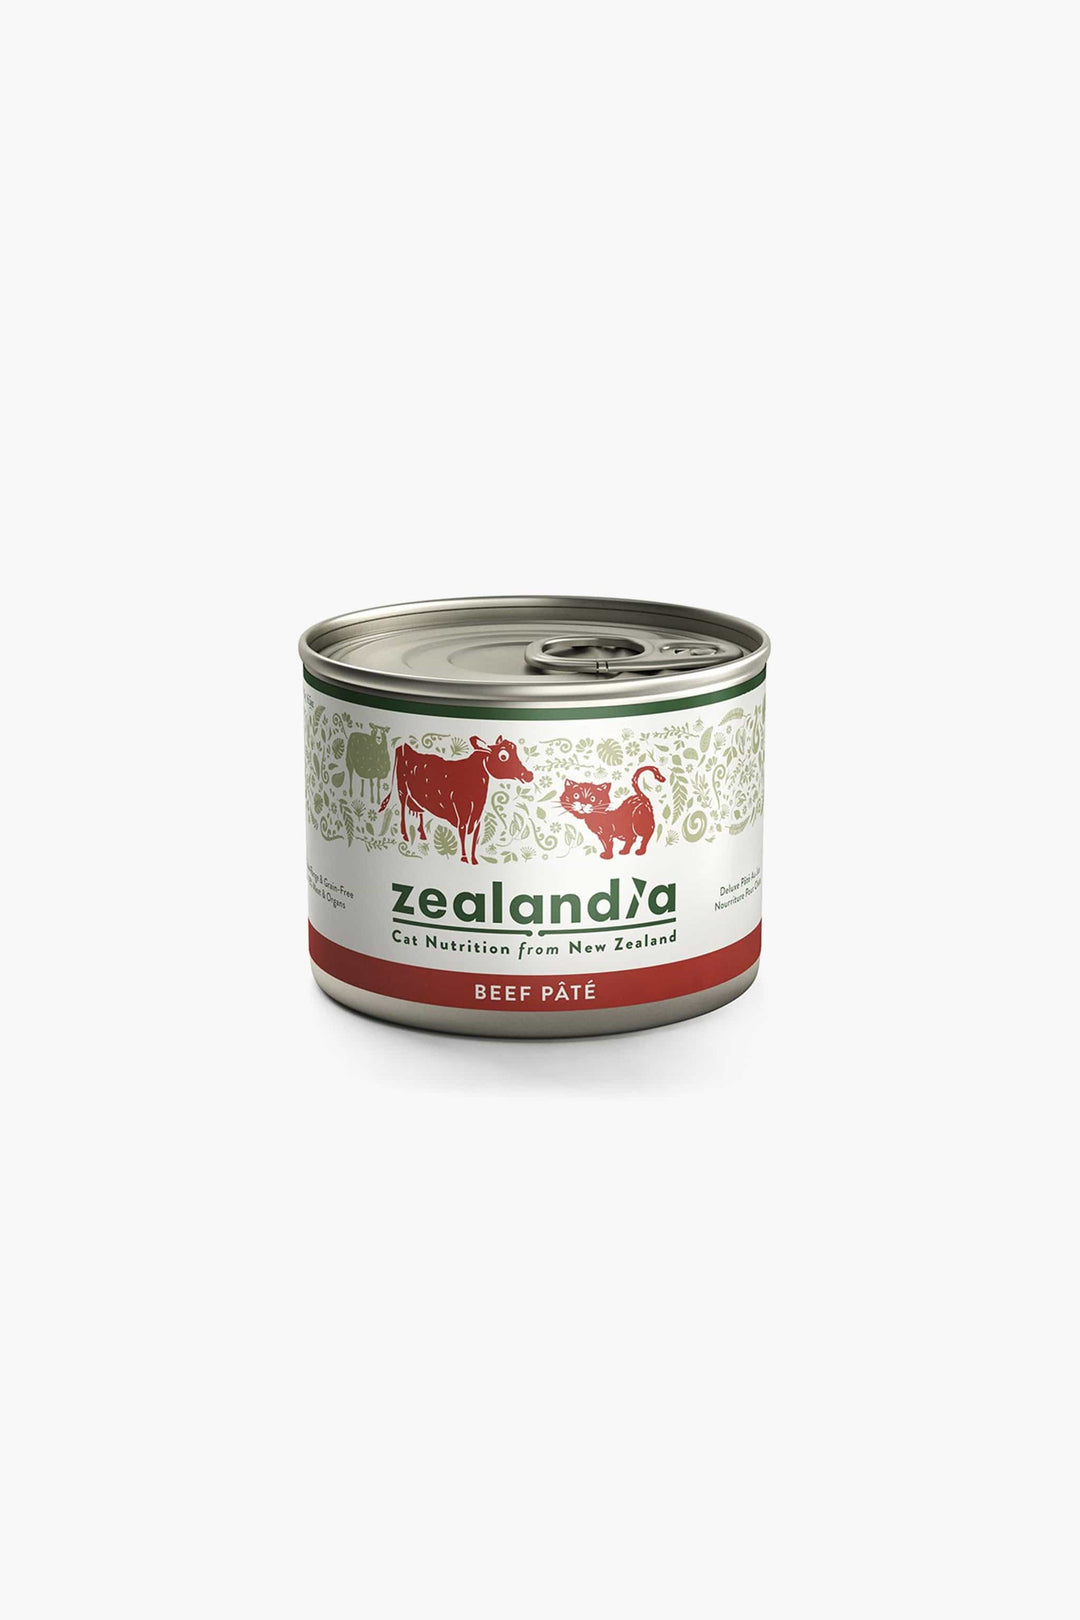 Zealandia Cat Beef Pate - Delicious and Nutritious Complete Wet Food for Cats! 185g